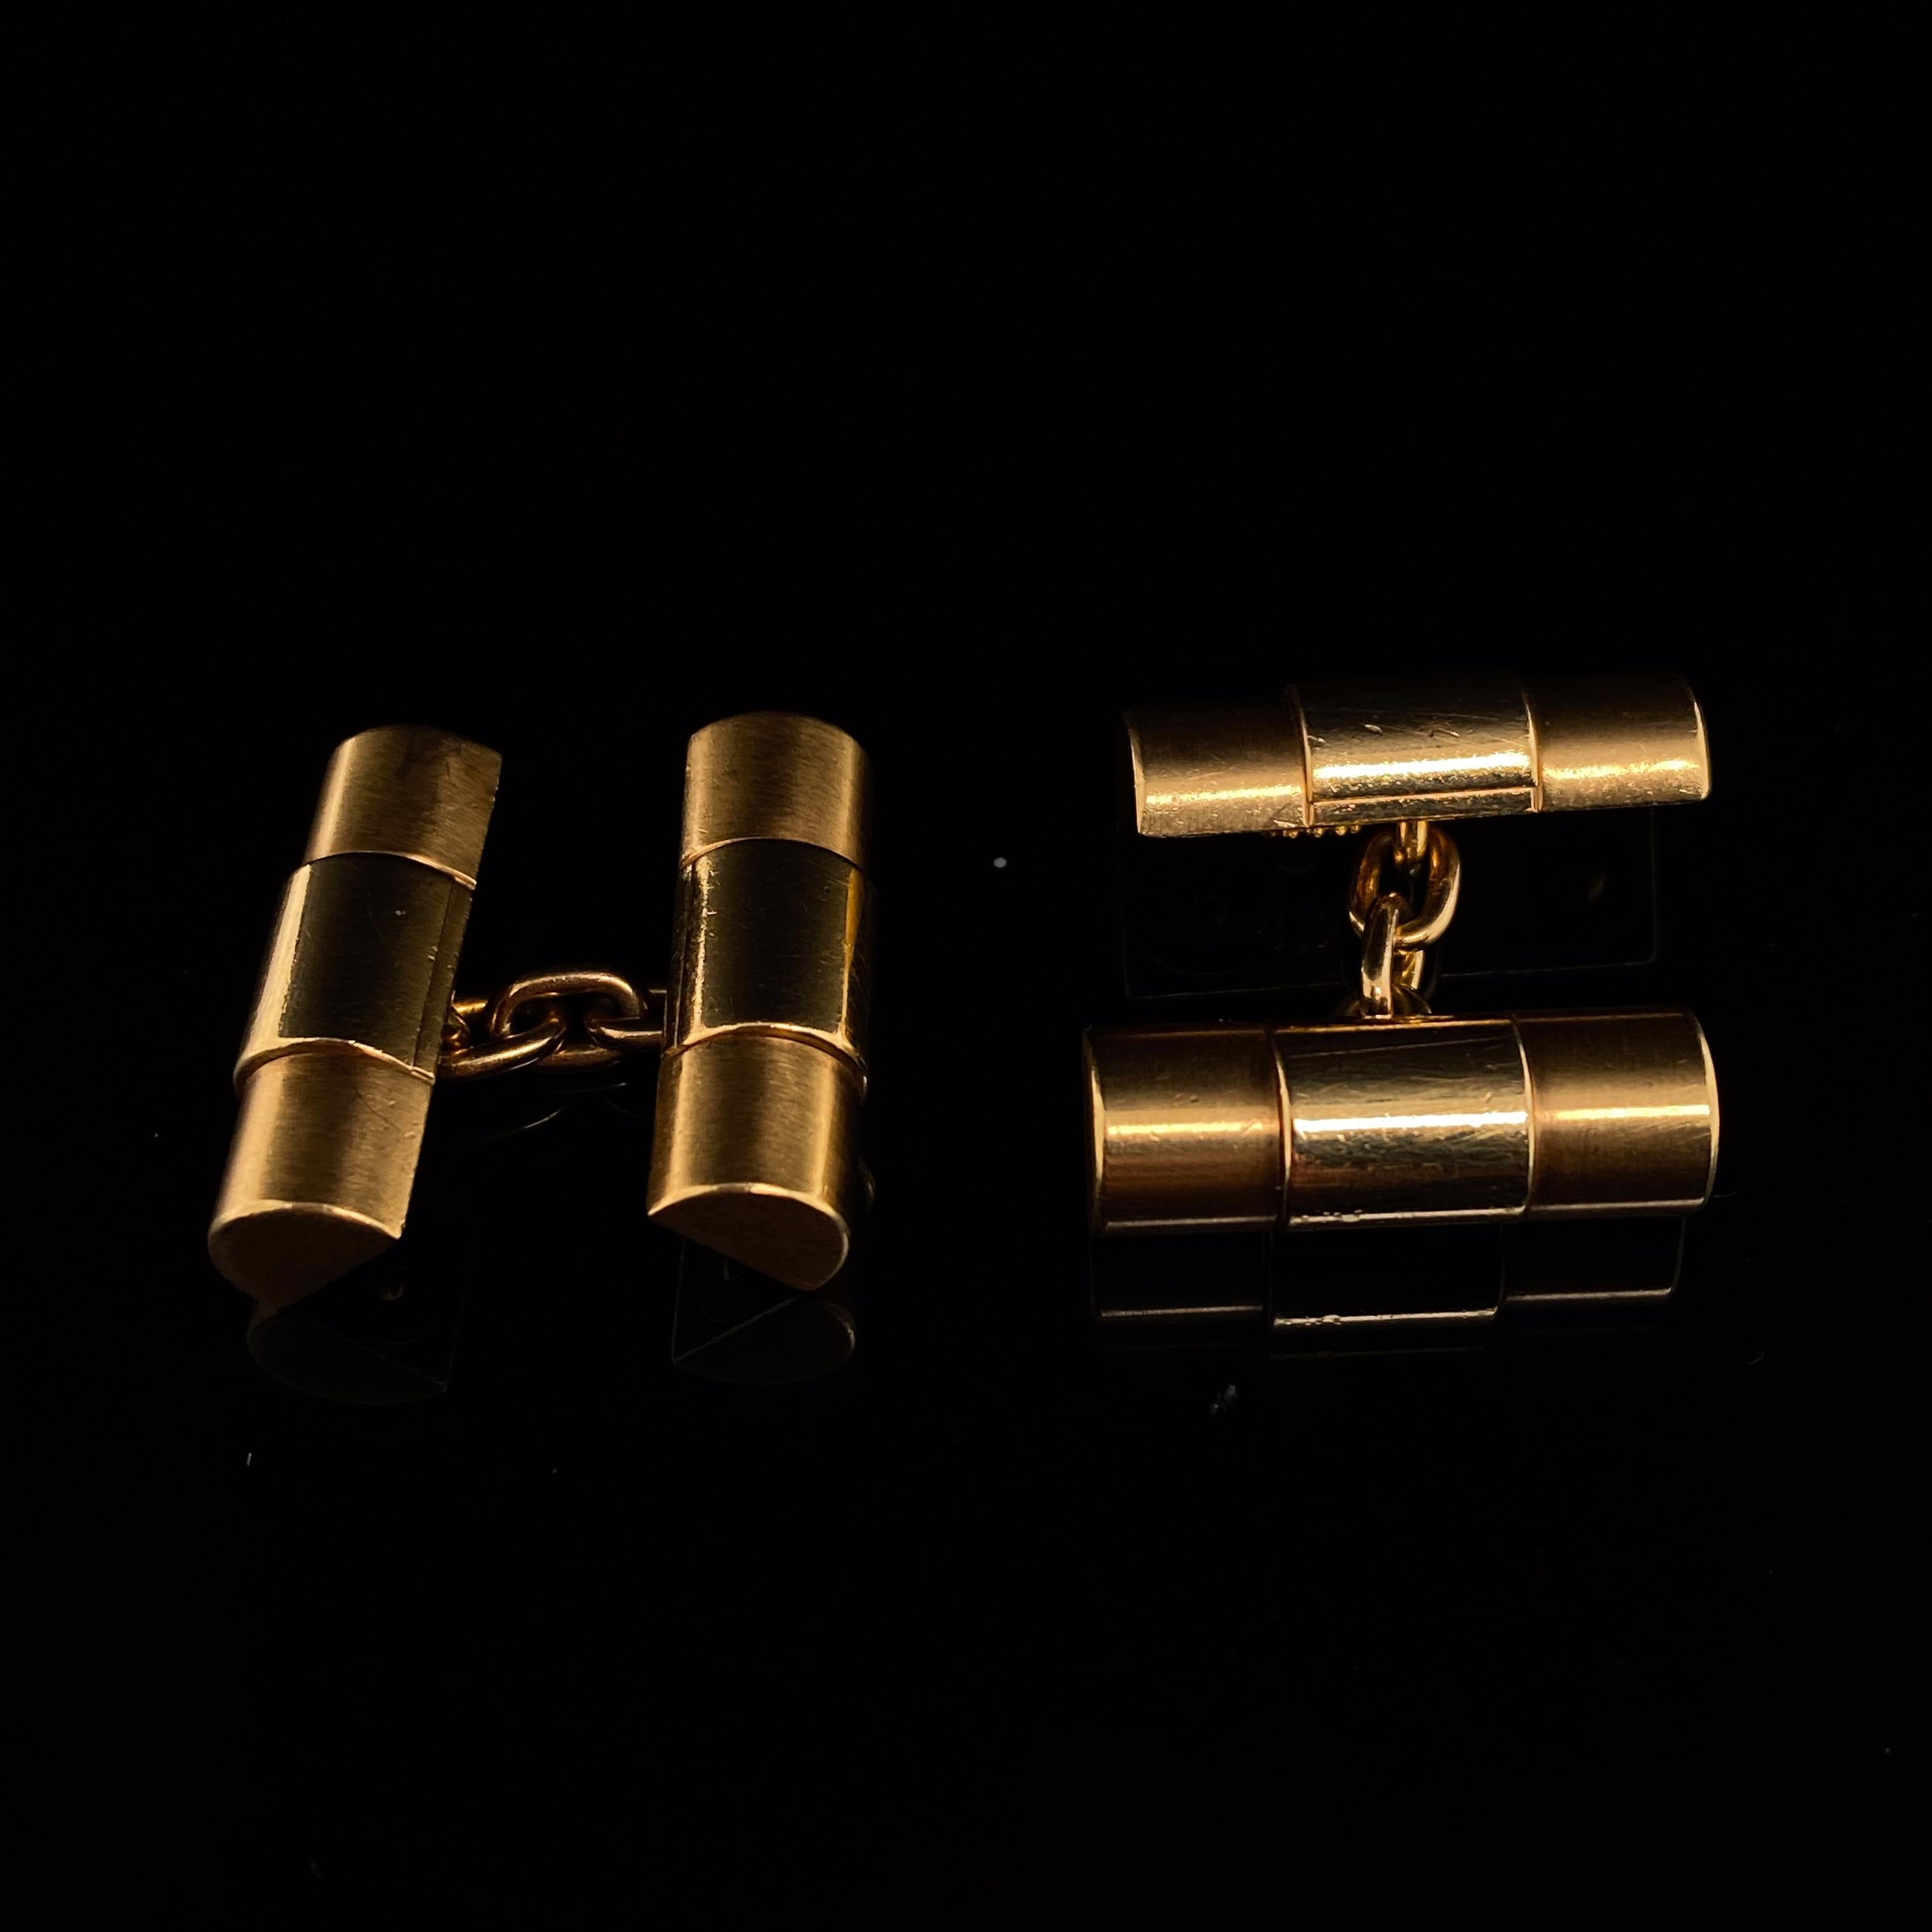 Rolex Bracelet Chain Link Cufflinks in 18 Karat Gold Circa 1990.

A really fantastic and unusual set of Rolex 18 karat yellow gold cuff links with chain link fittings.

Formed of Four separate distinctive Rolex Day Date bracelet links, inscribed